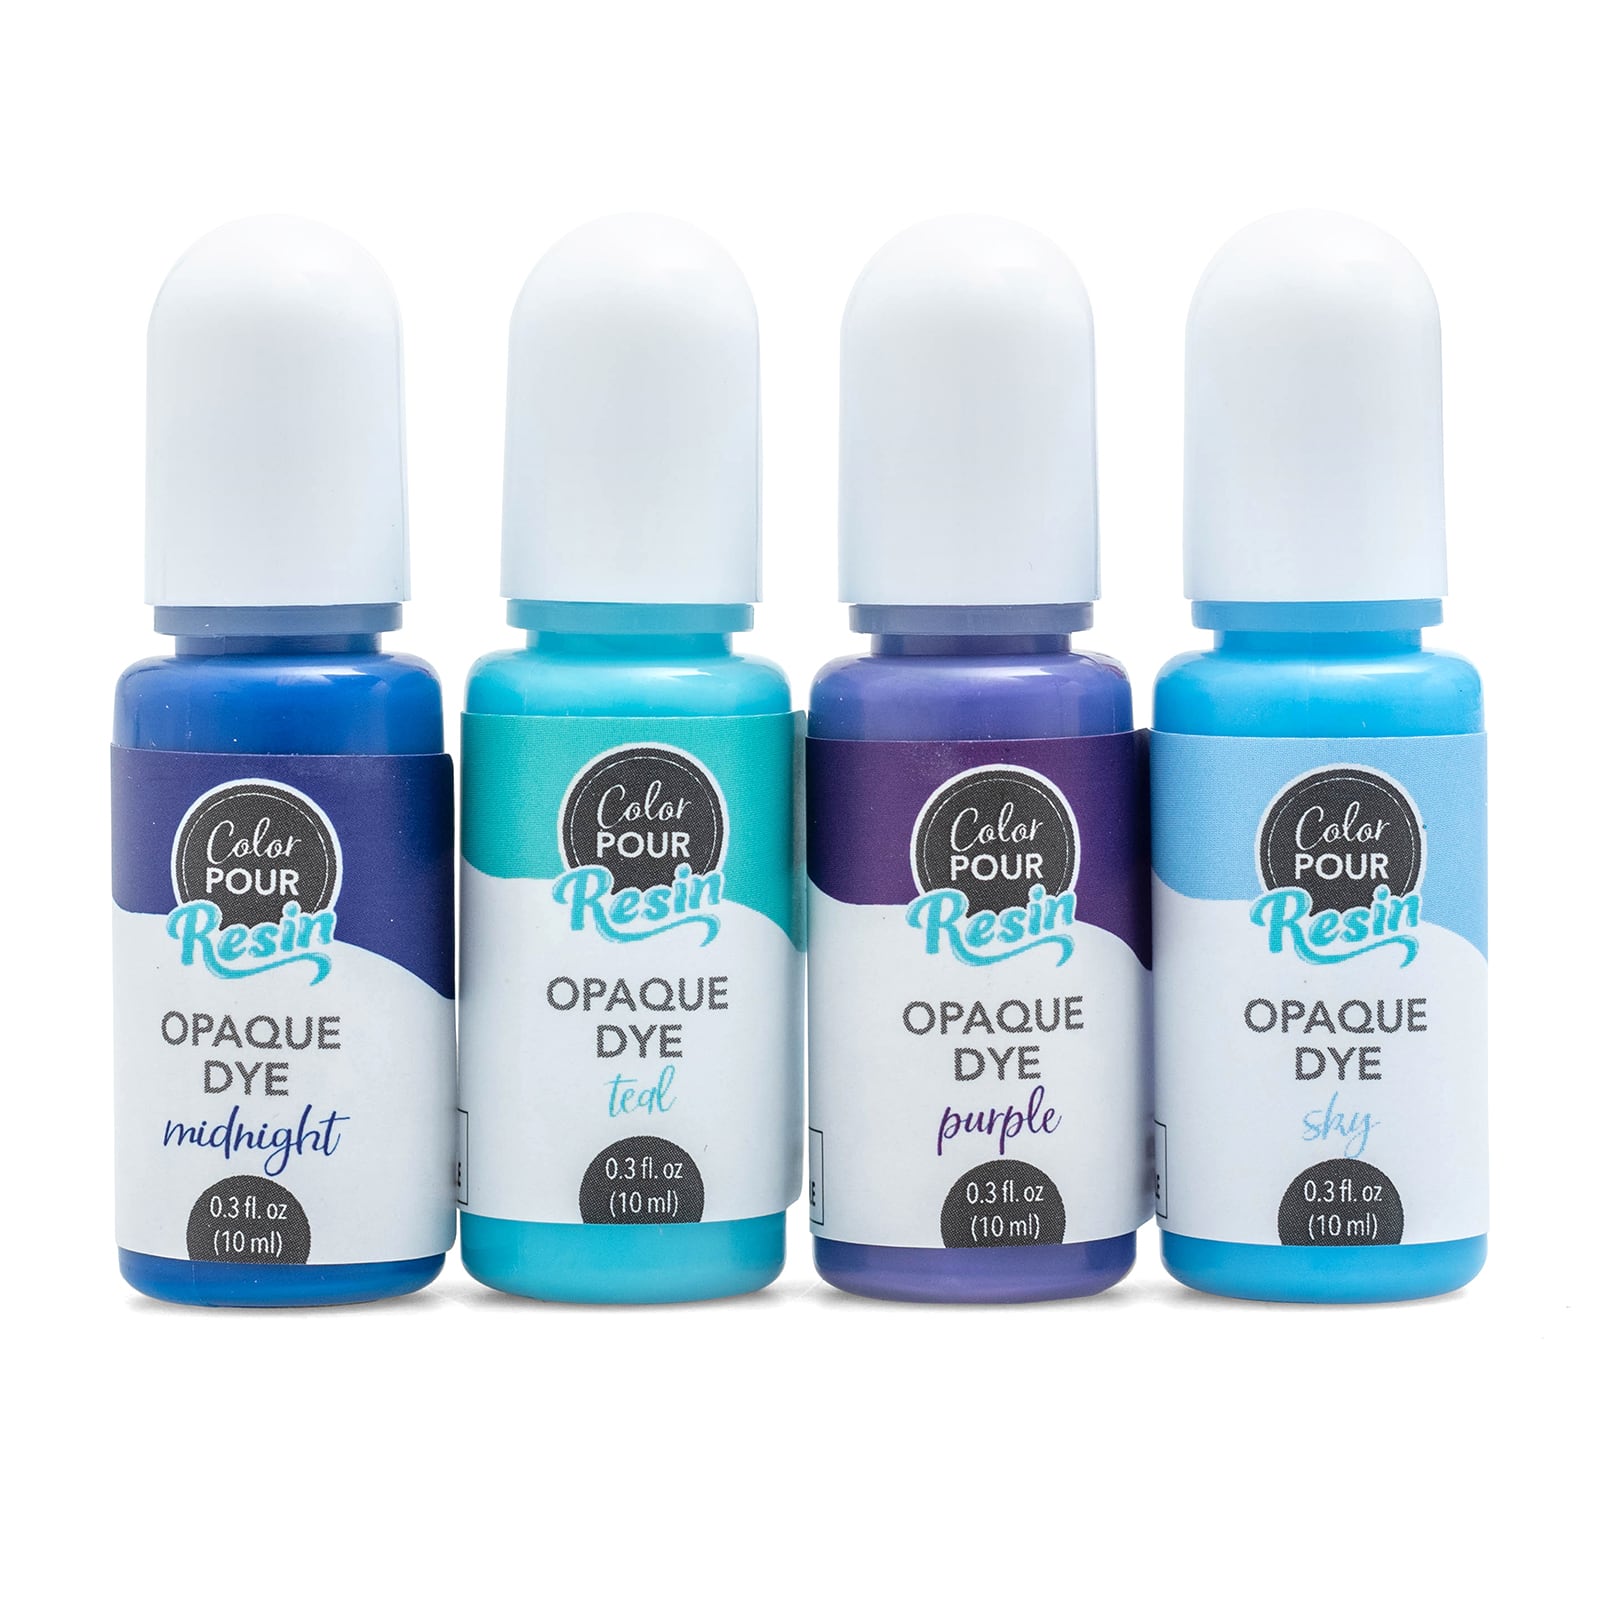 American Crafts™ Color Pour Resin Galaxy Opaque Dye